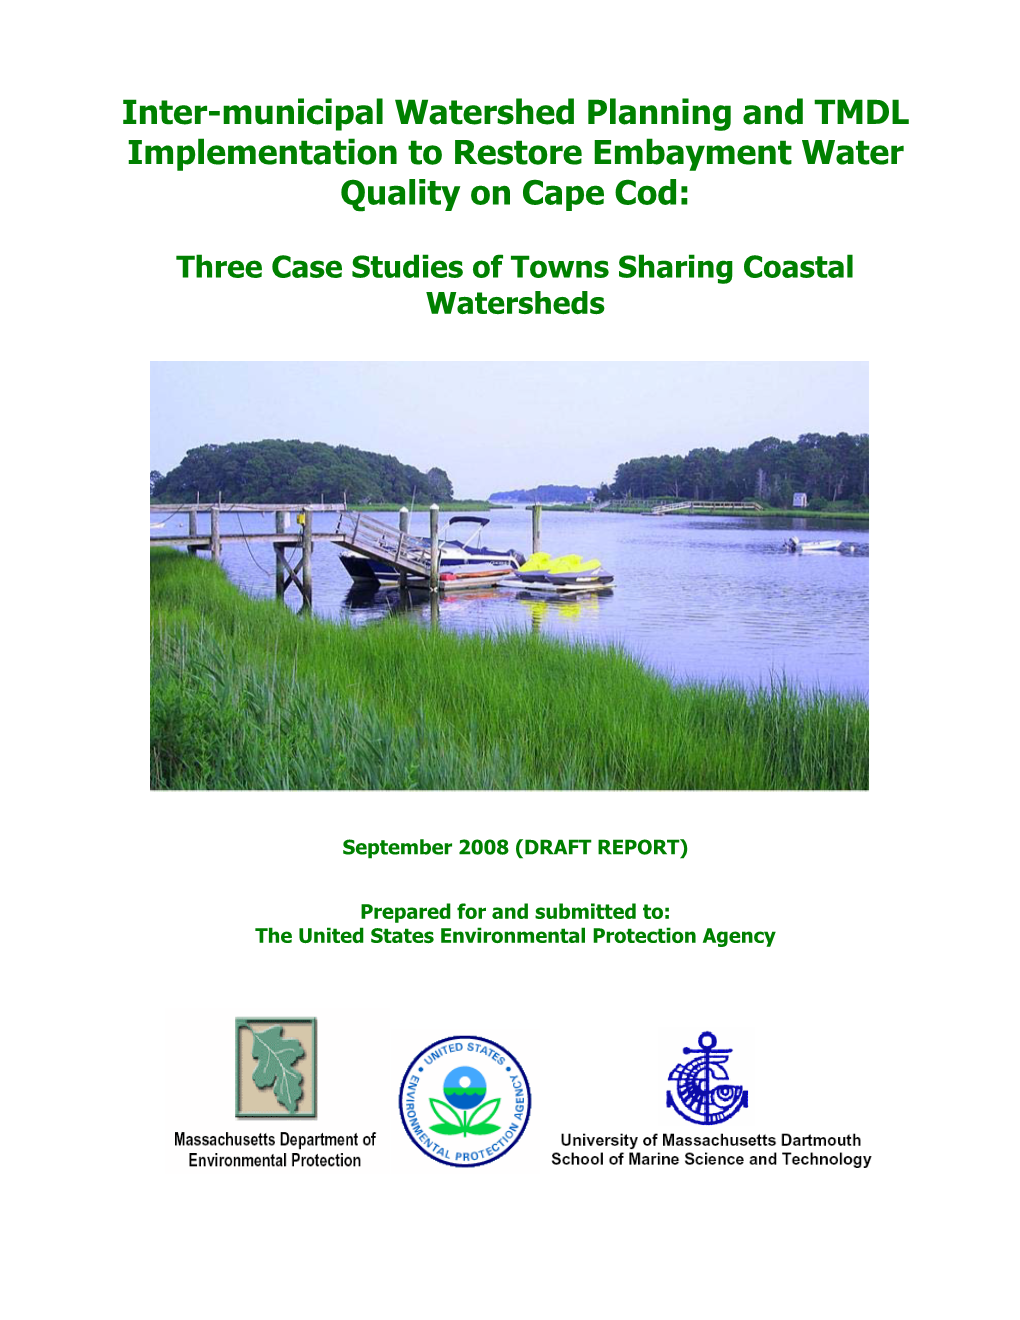 Inter-Municipal Watershed Planning and TMDL Implementation to Restore Embayment Water Quality on Cape Cod